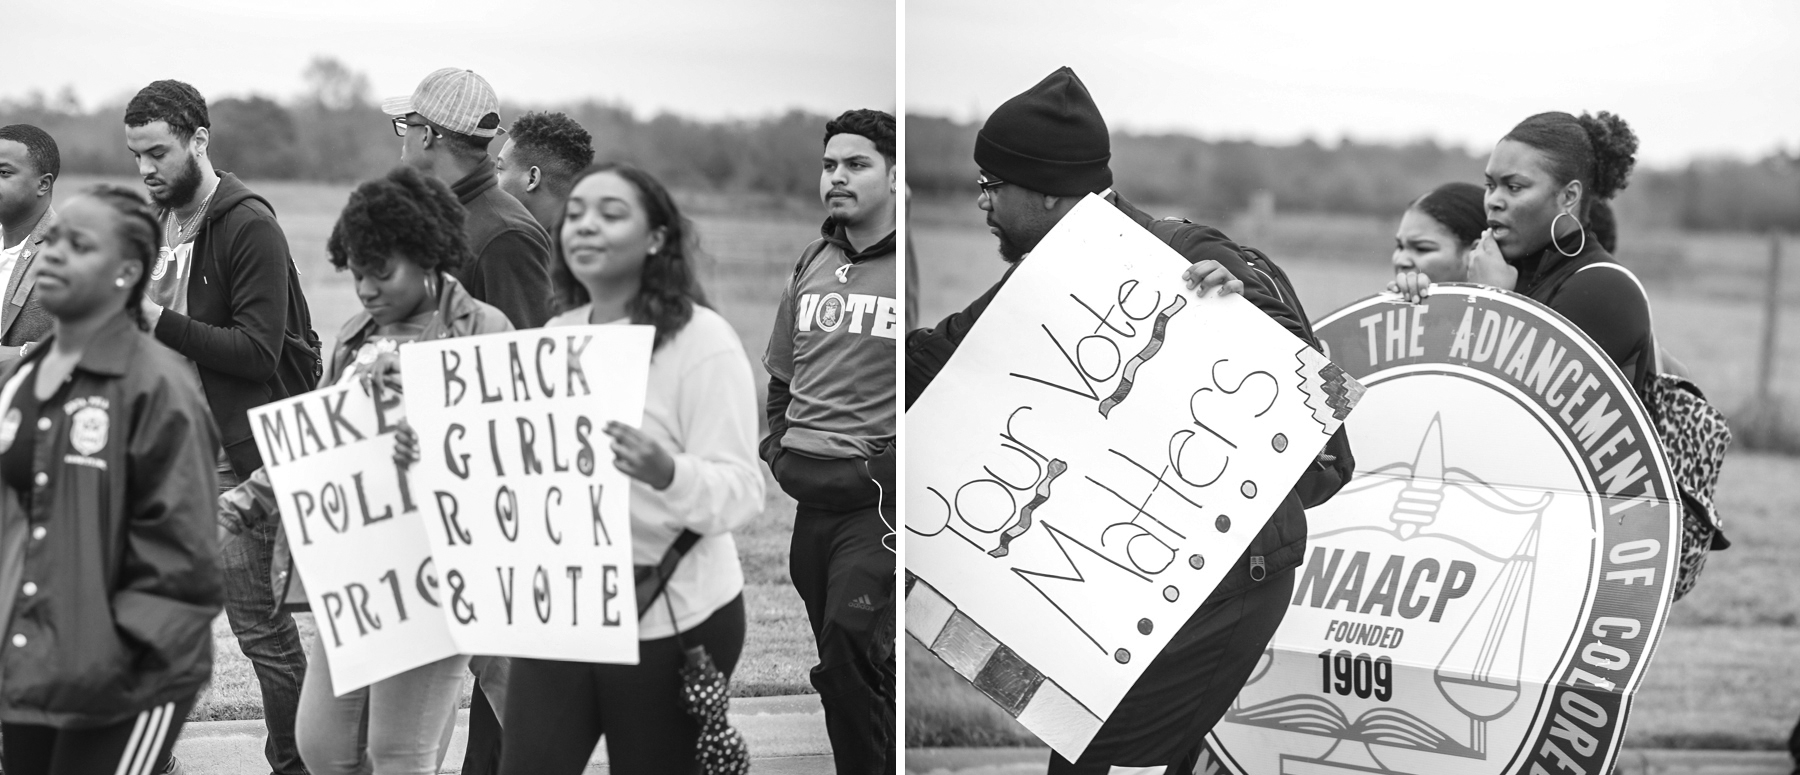 Your Vote Matters Sign; NAACP Sign - Students Marching